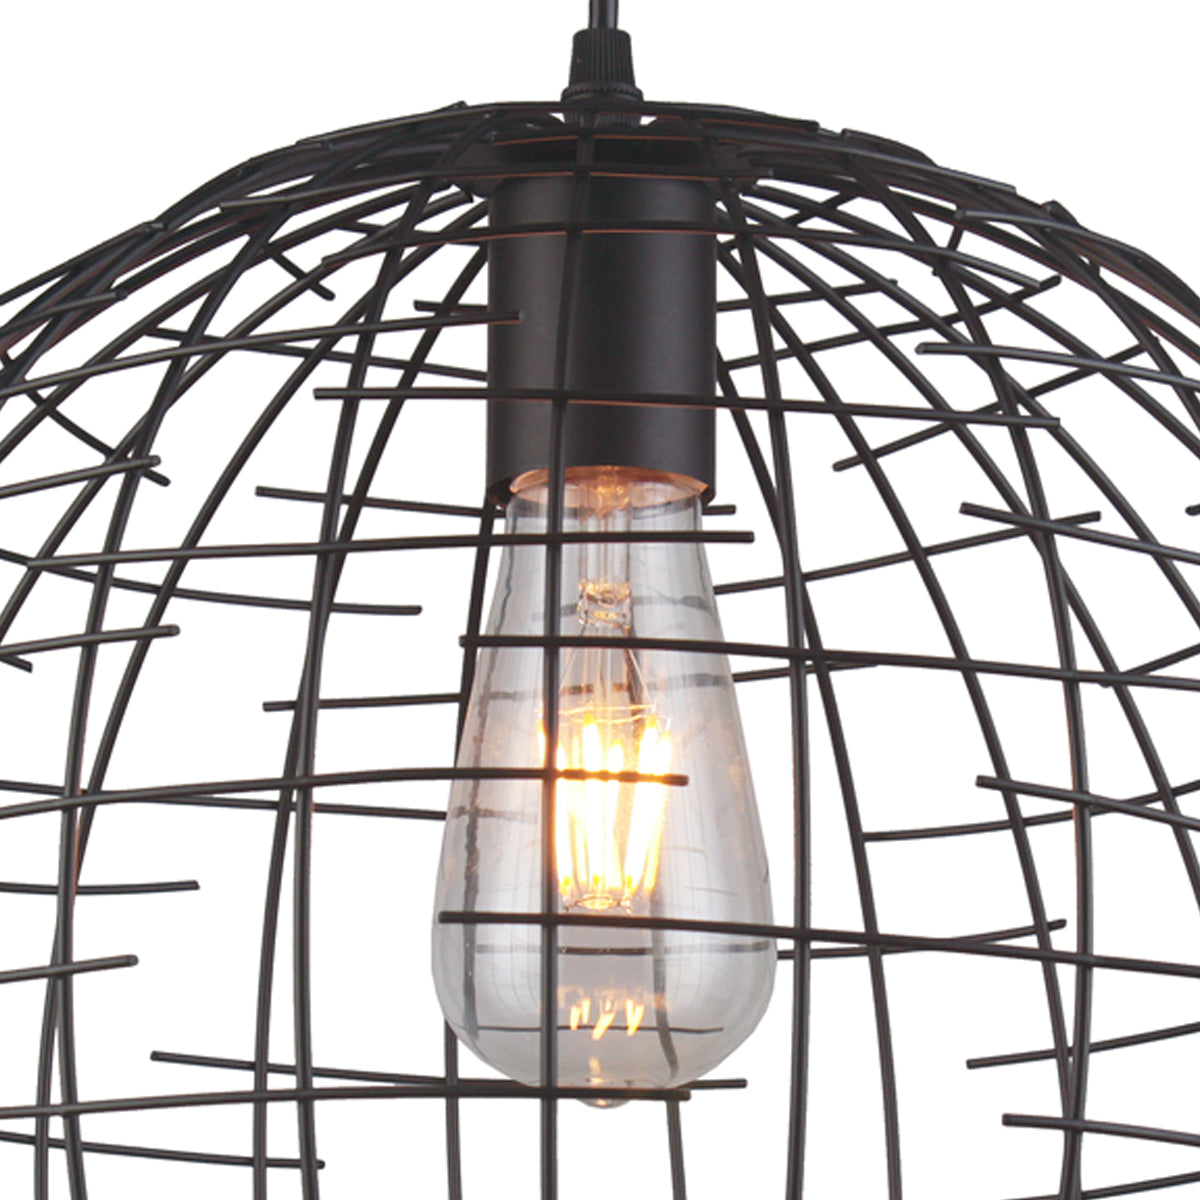 Our Edward pendant light features a round caged shade finished in matt black. A modern take on the vintage cage style that looks fantastic when teamed with a filament style lamp. Comes as a complete light fitting and the height can be adjusted at the time of fitting.